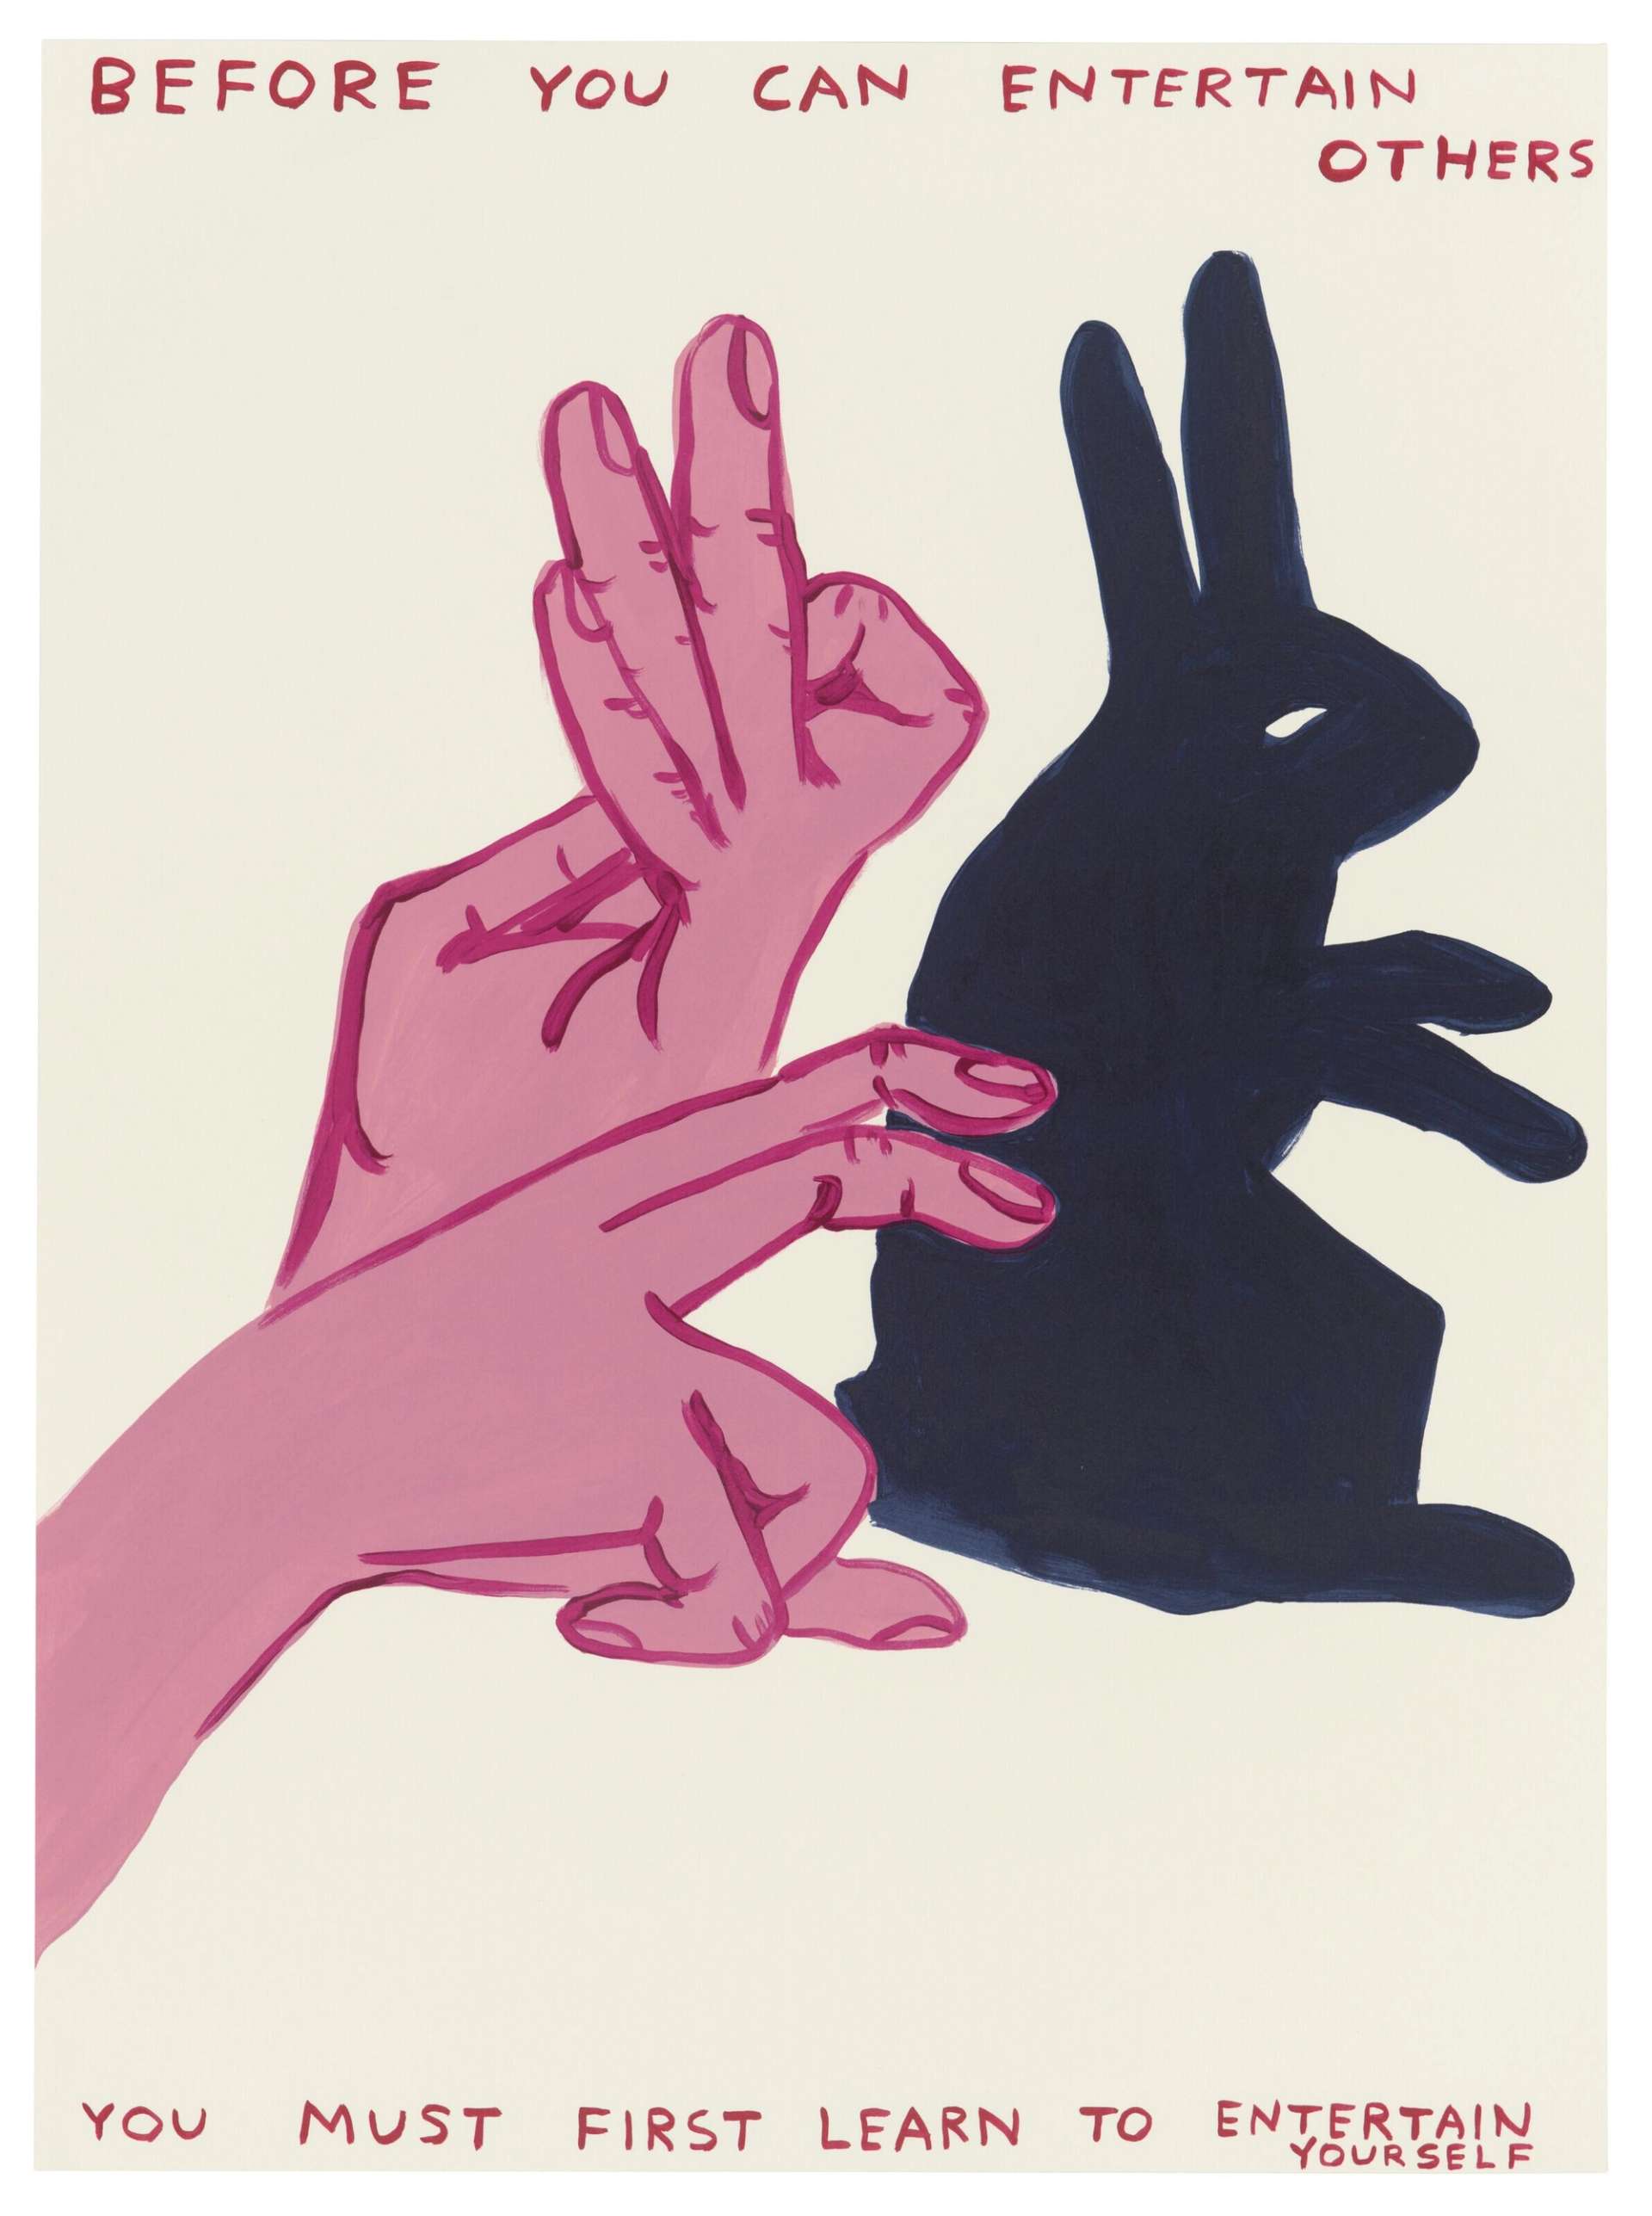 This work shows a pair of pink hands fodling themselves to create the shape of a rabbit in shadows. The title is scribbled in red on the borders.